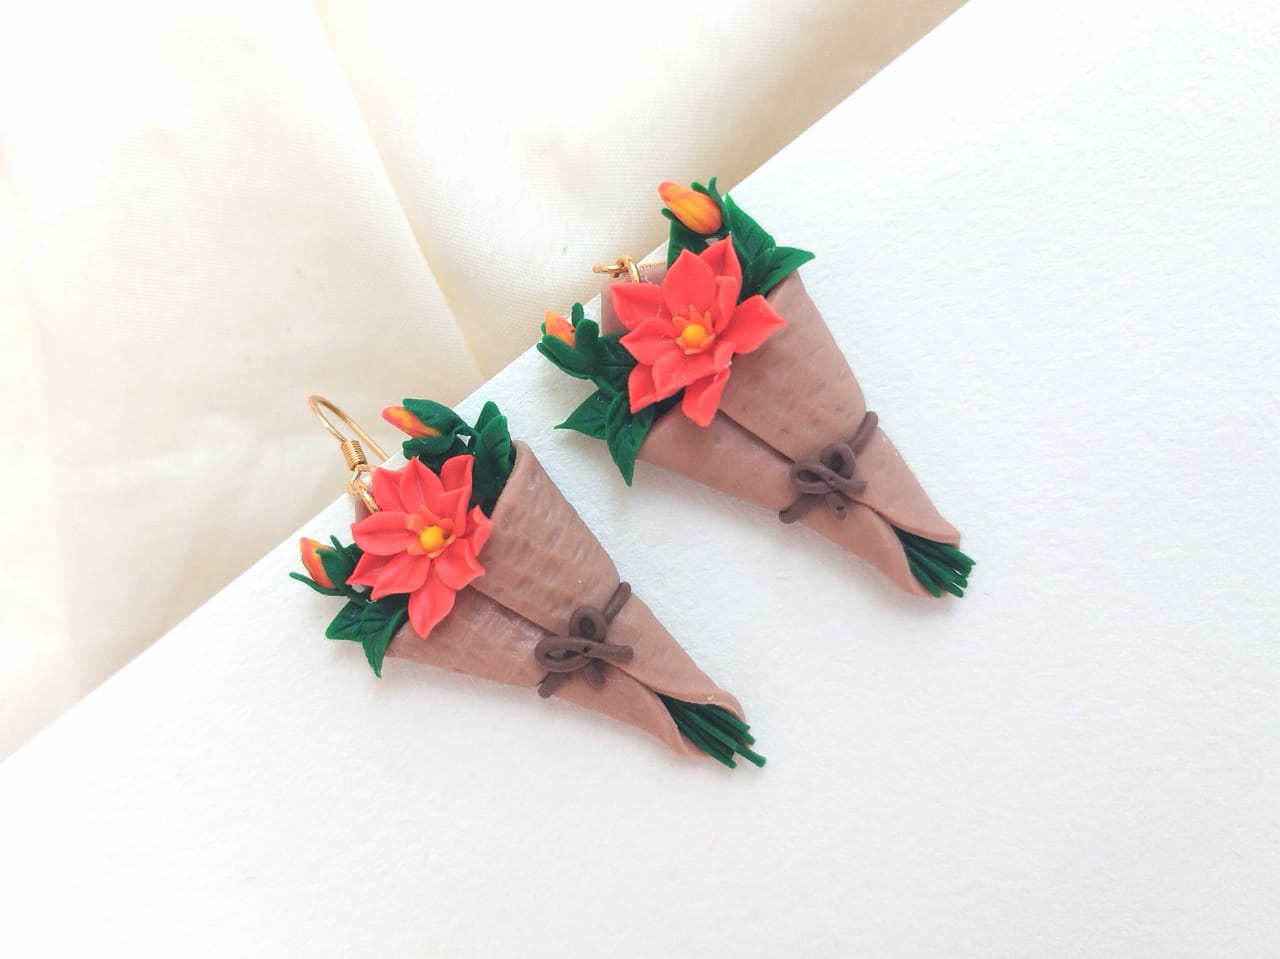 Ira BOUQUET CLAY EARRINGS , floral lightweight clay earrings  valentine gift hypoallergenic, Bouquet Hoop Earrings, Teardrop Floral Earrings, Flower Hoops, Flower Drop Earrings, Floral Long Earrings,  statement earring